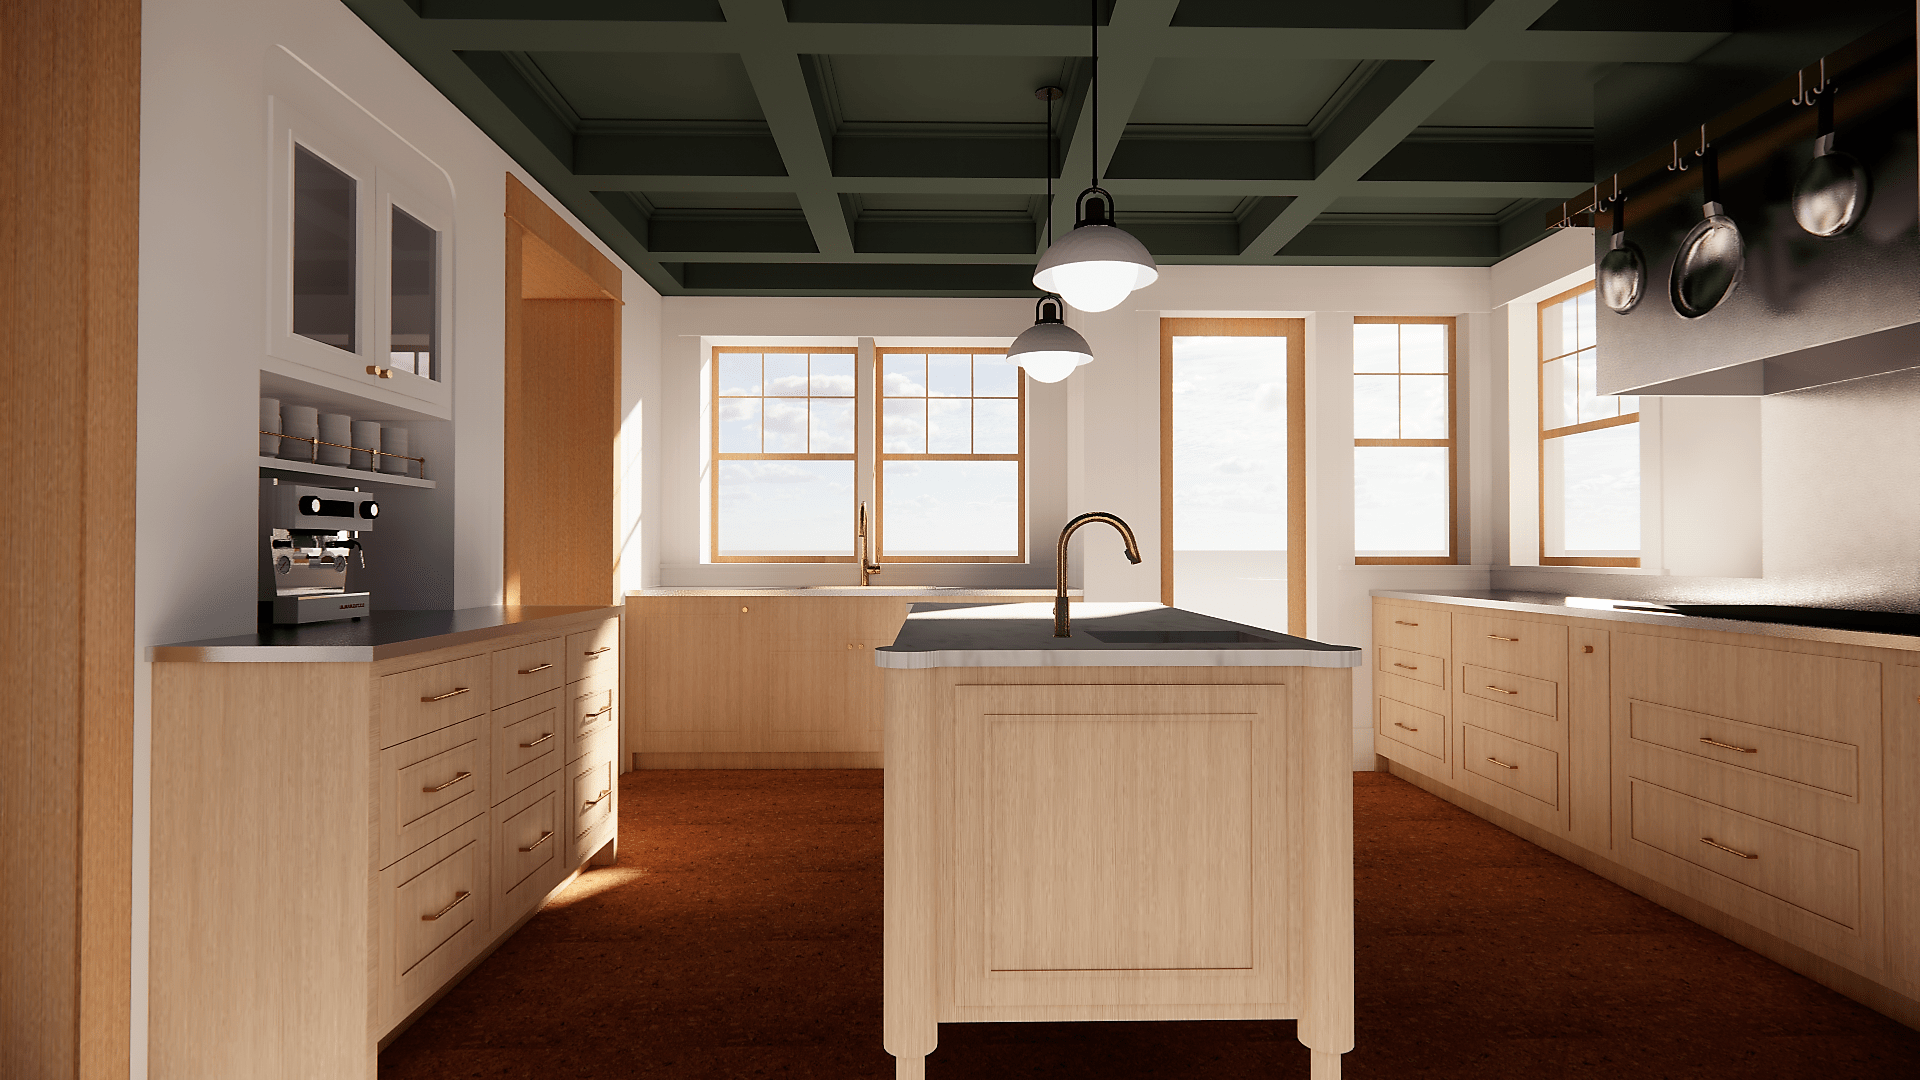 Residential craftsman home kitchen remodel rendering natural wood and light